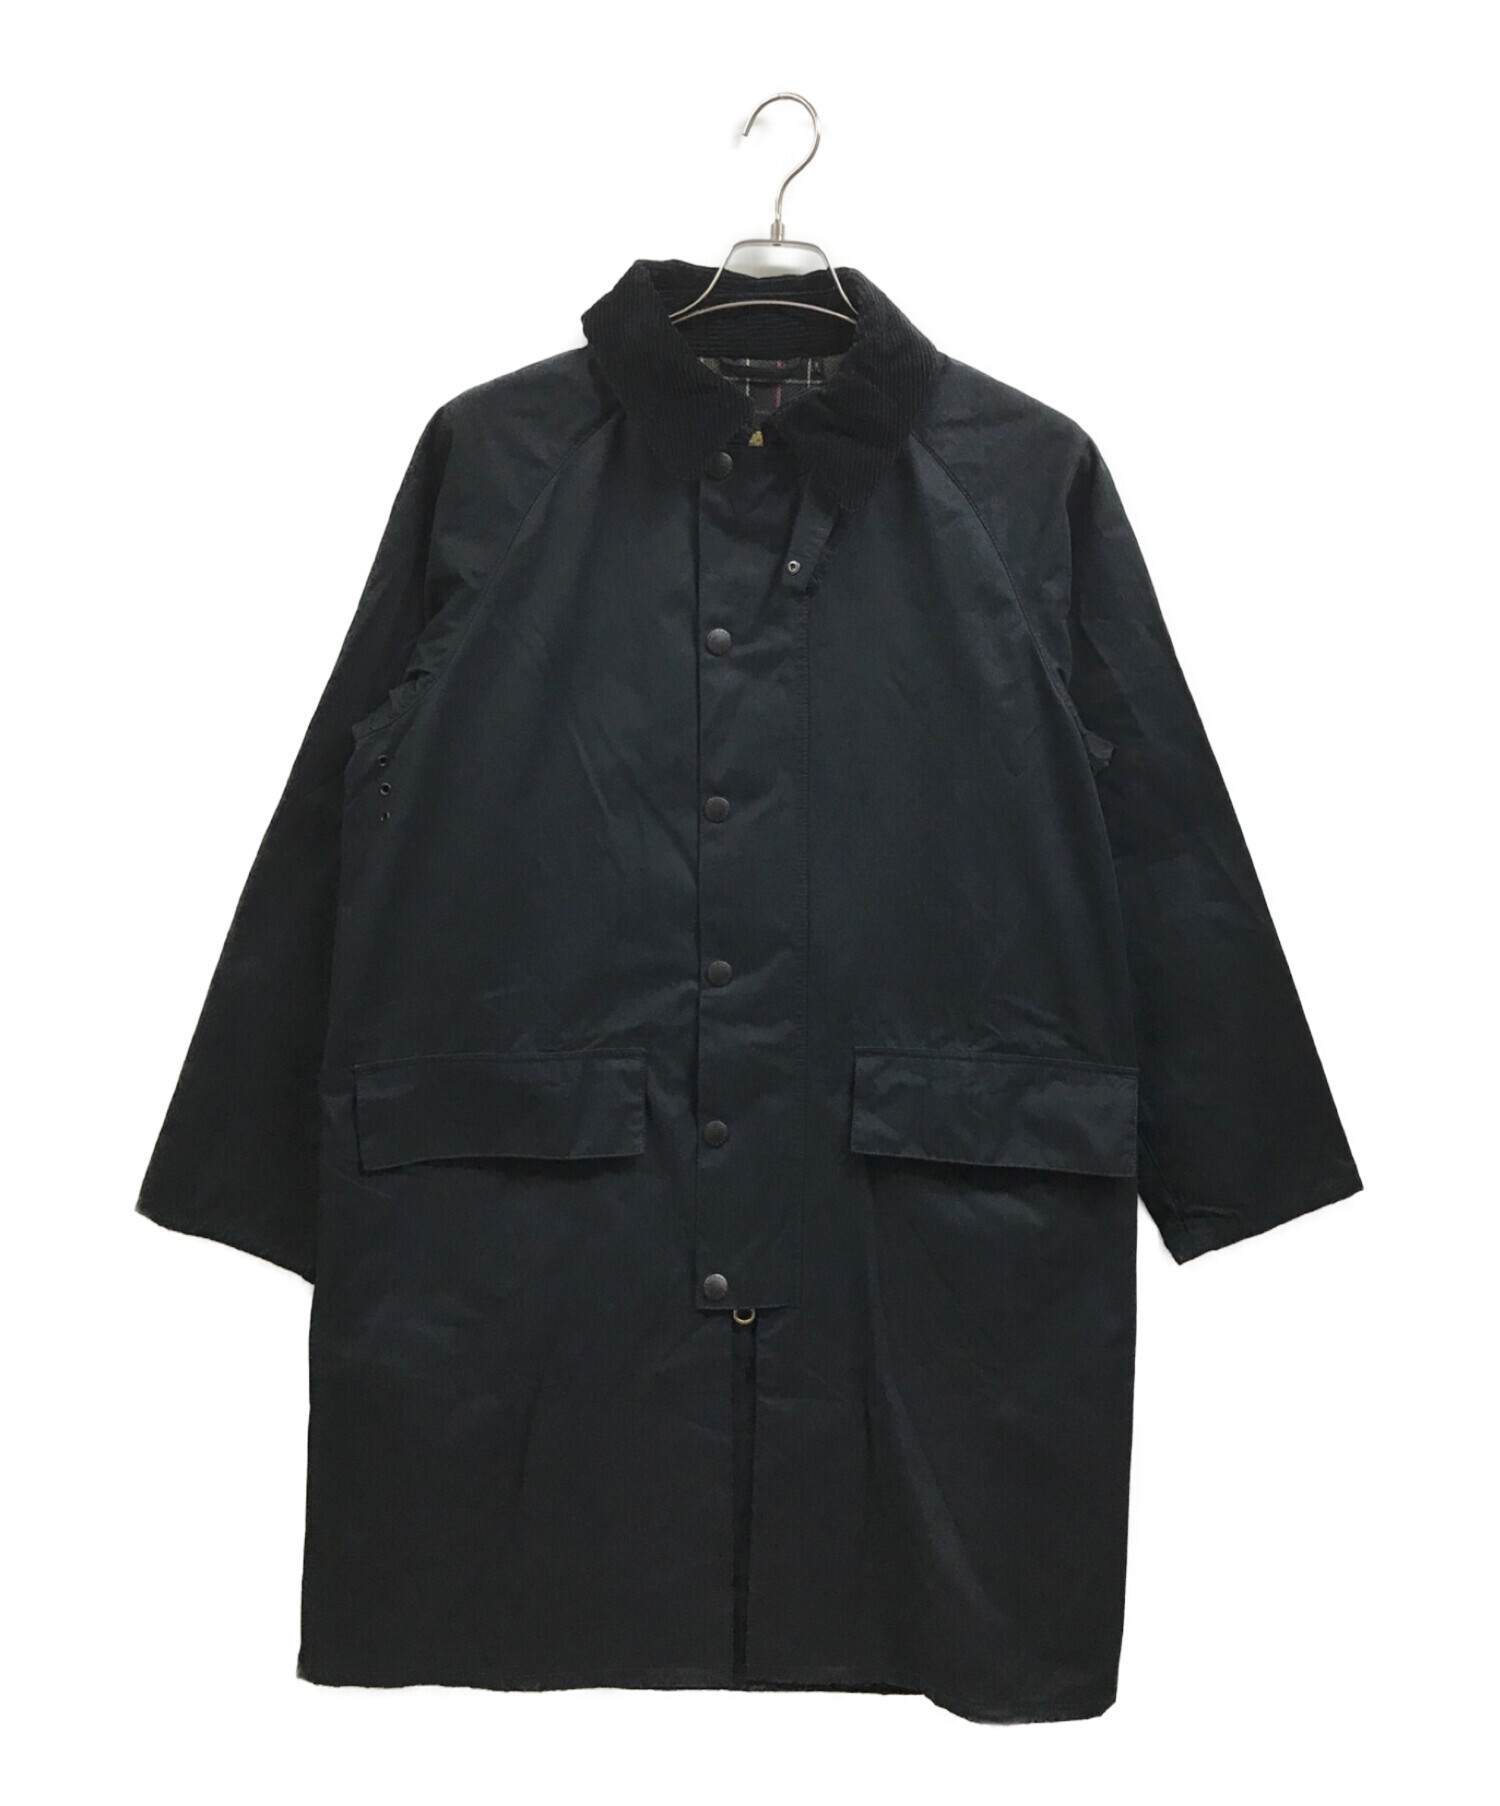 Barbour バブアー コート（その他） 36(S位) 黒